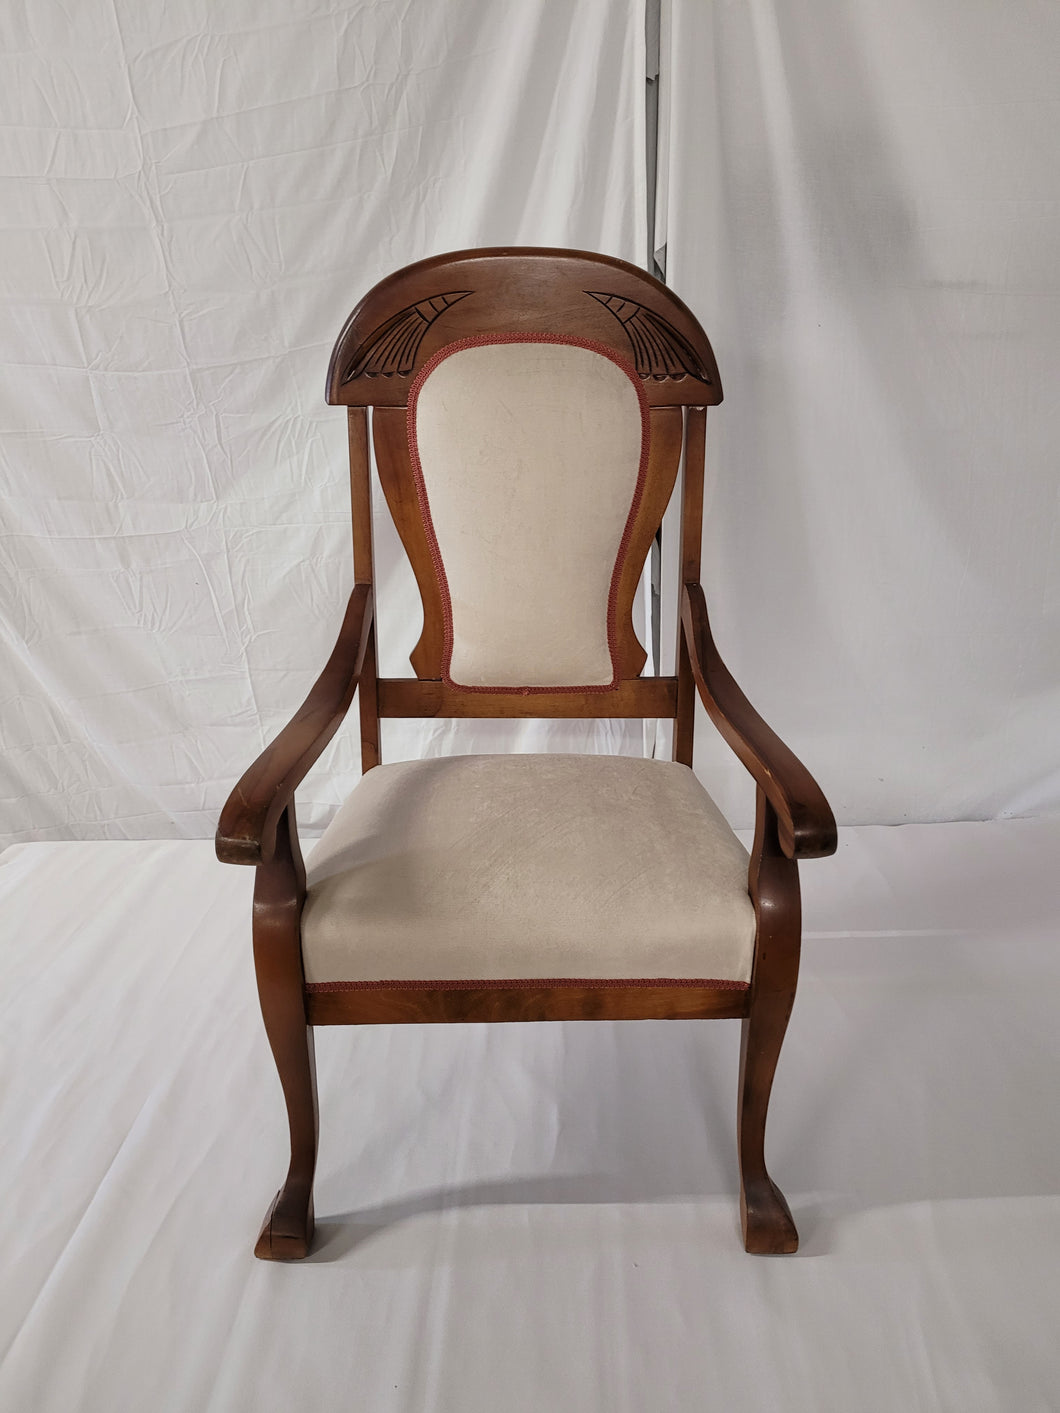 Beautiful Oak Living Room Chairs -  Newly Upholstered and Restored